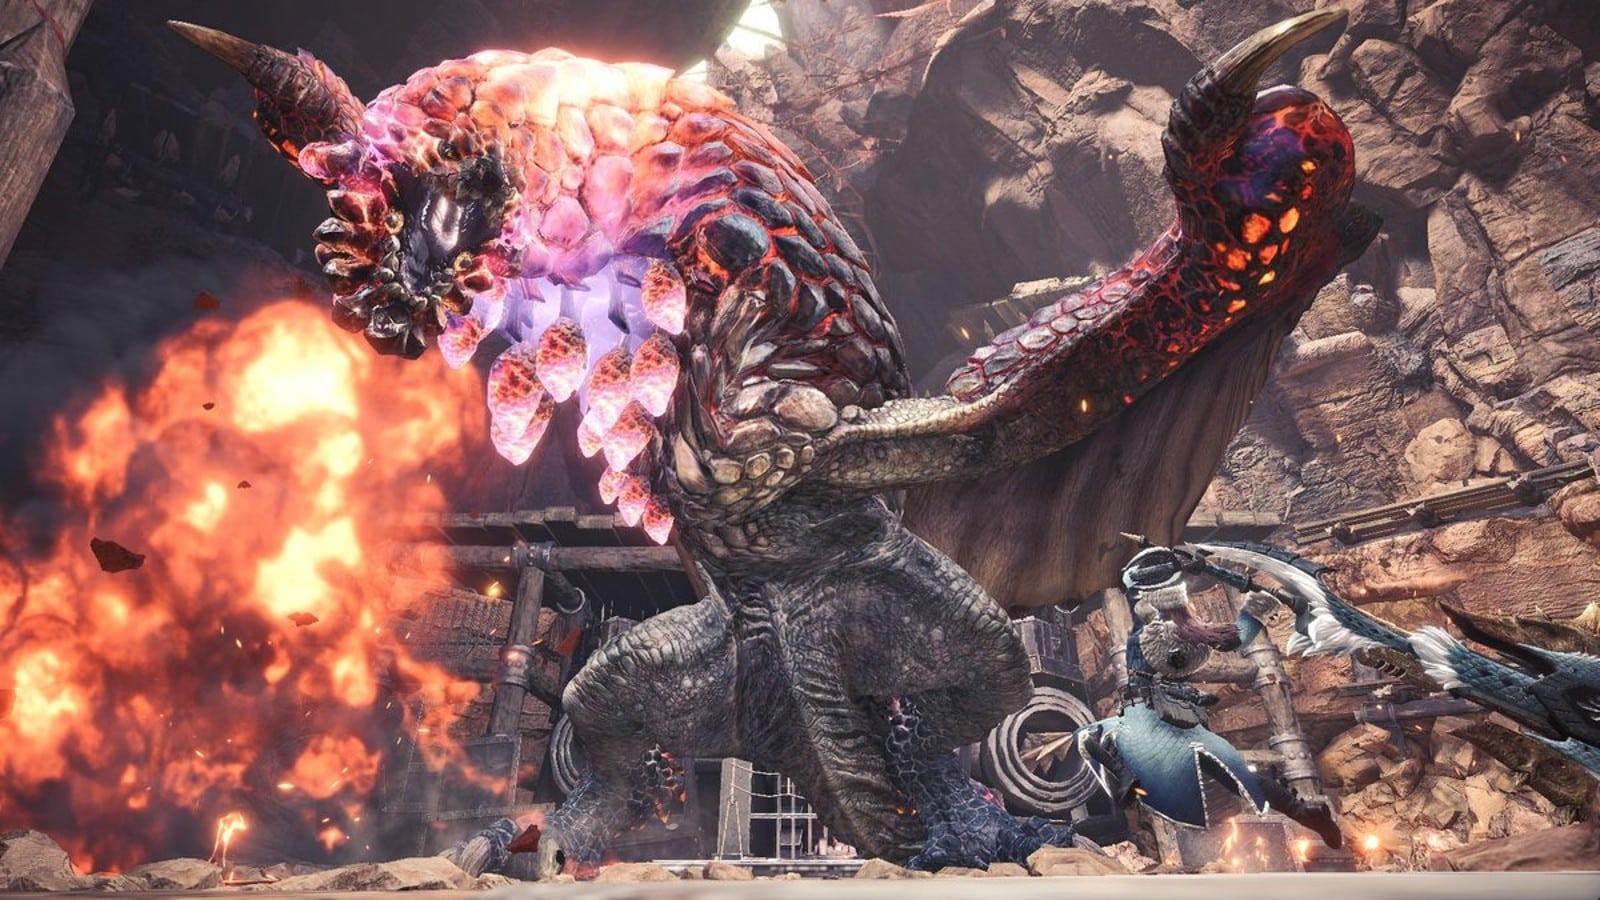 An image of the Seething Bazelgeuse monster.